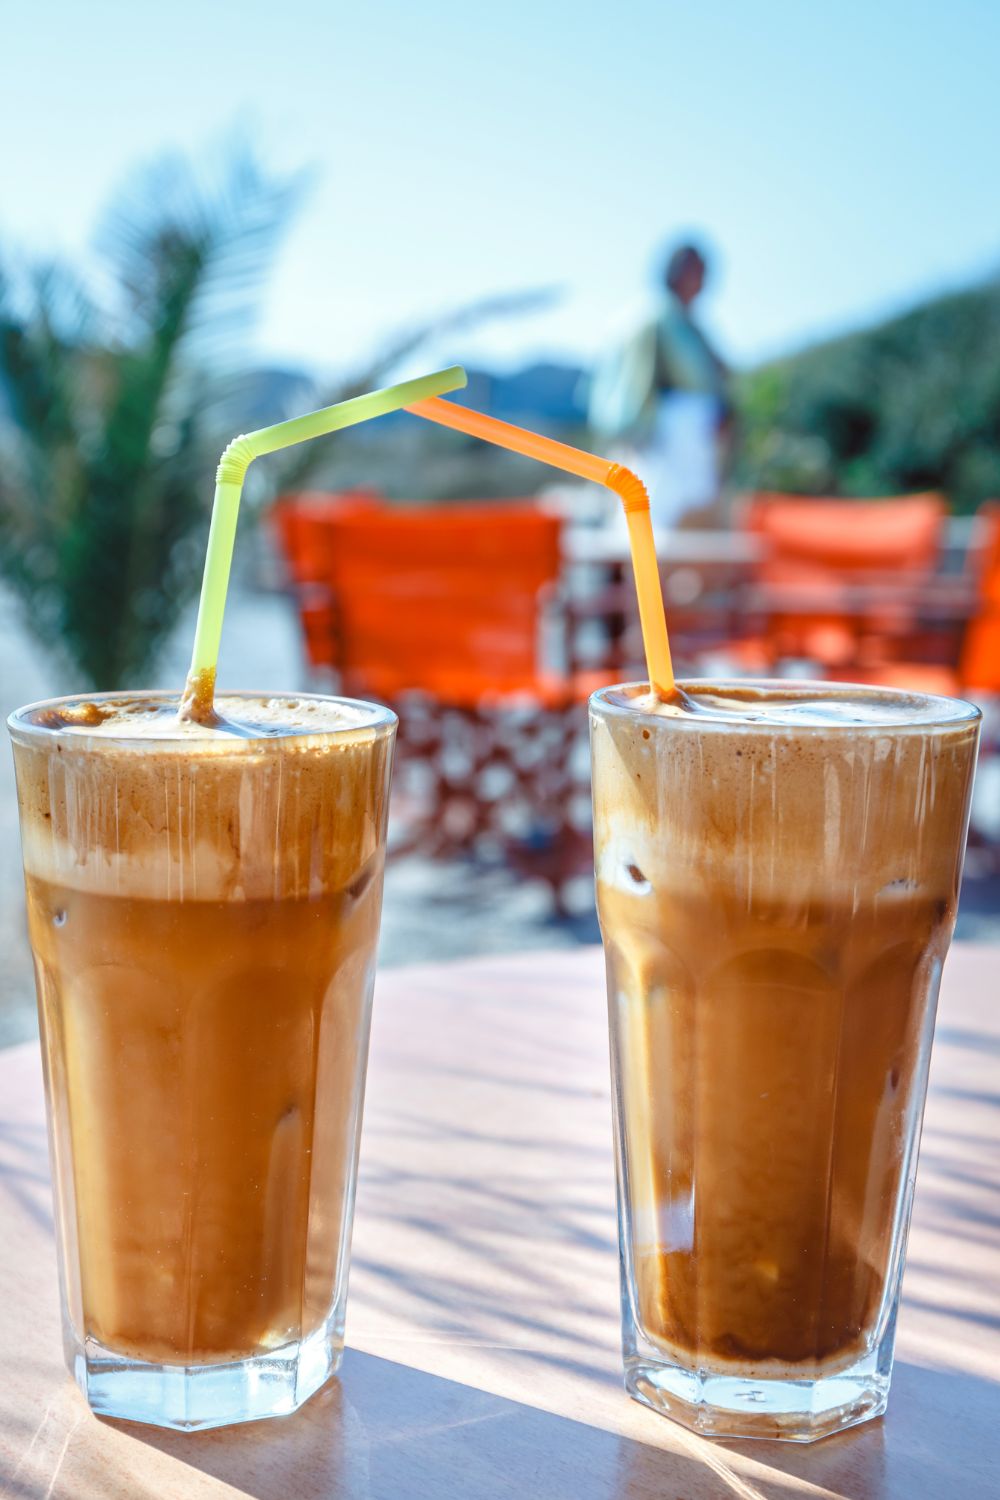 Two glasses of iced frappe with straws on an outdoor table, with a blurry background of a person walking near tables.